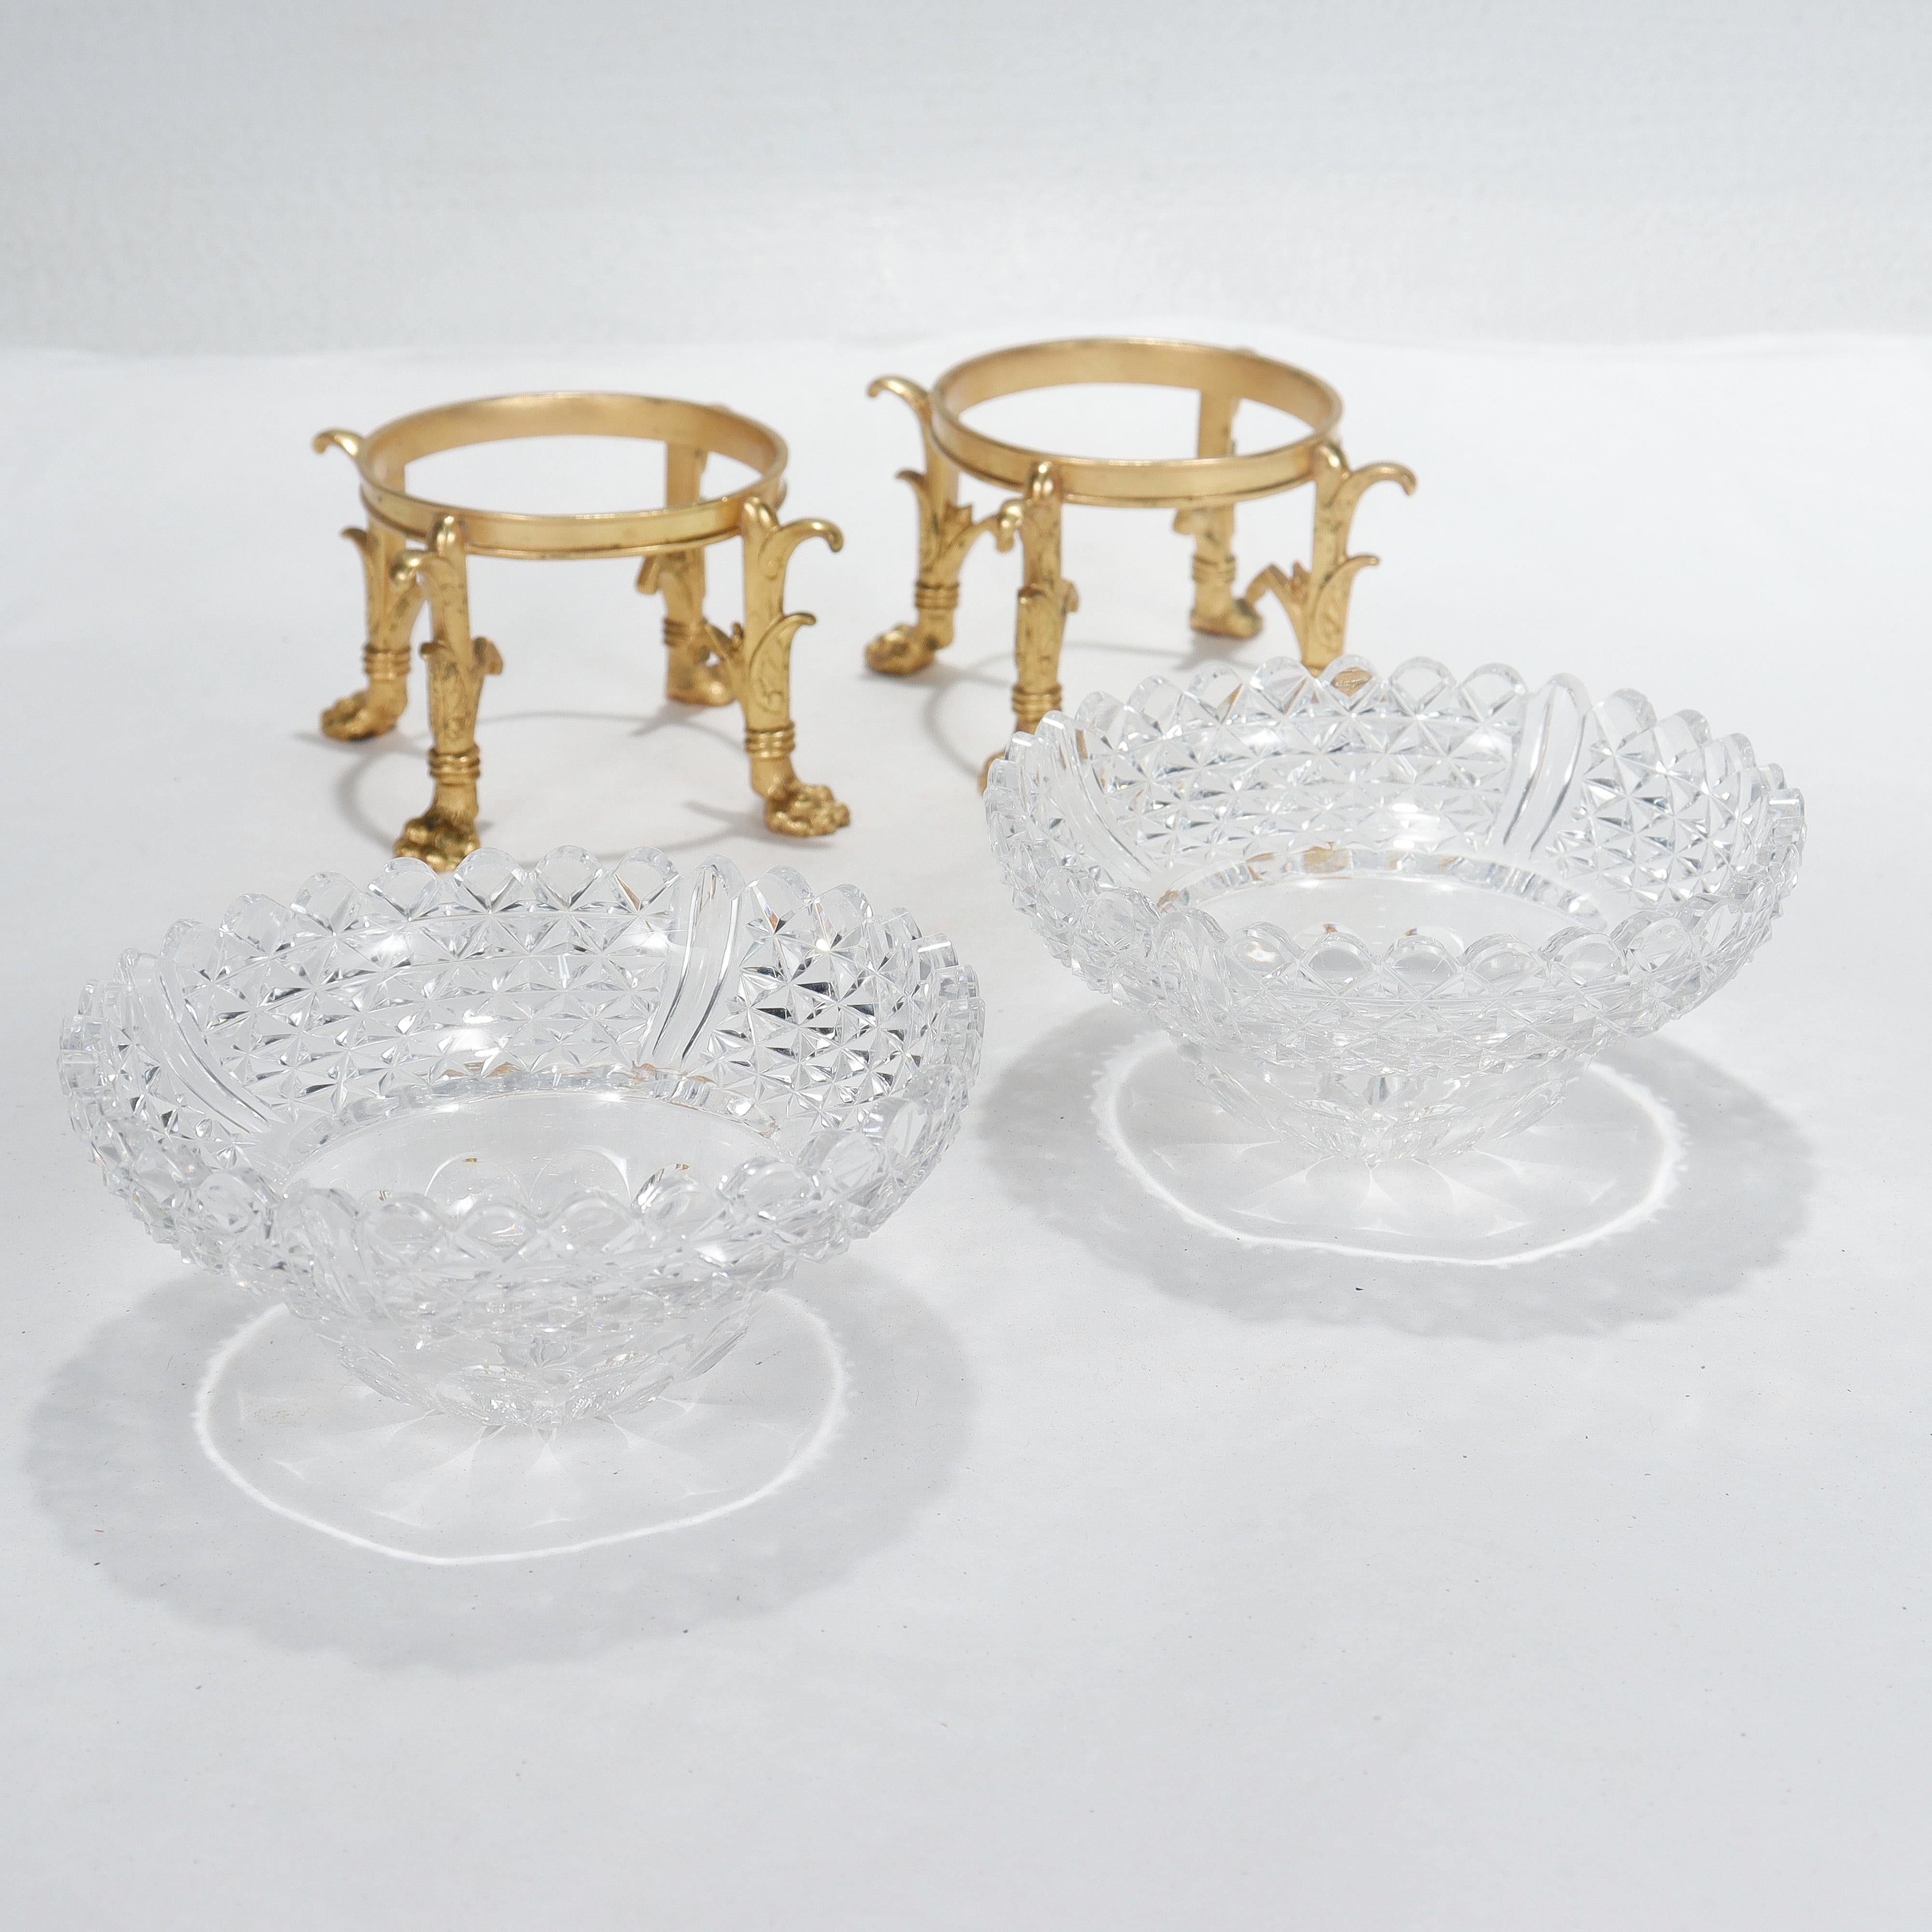 Pair of Gilt Bronze & Cut Glass Footed Bowls Attributed to F. & C. Osler 7